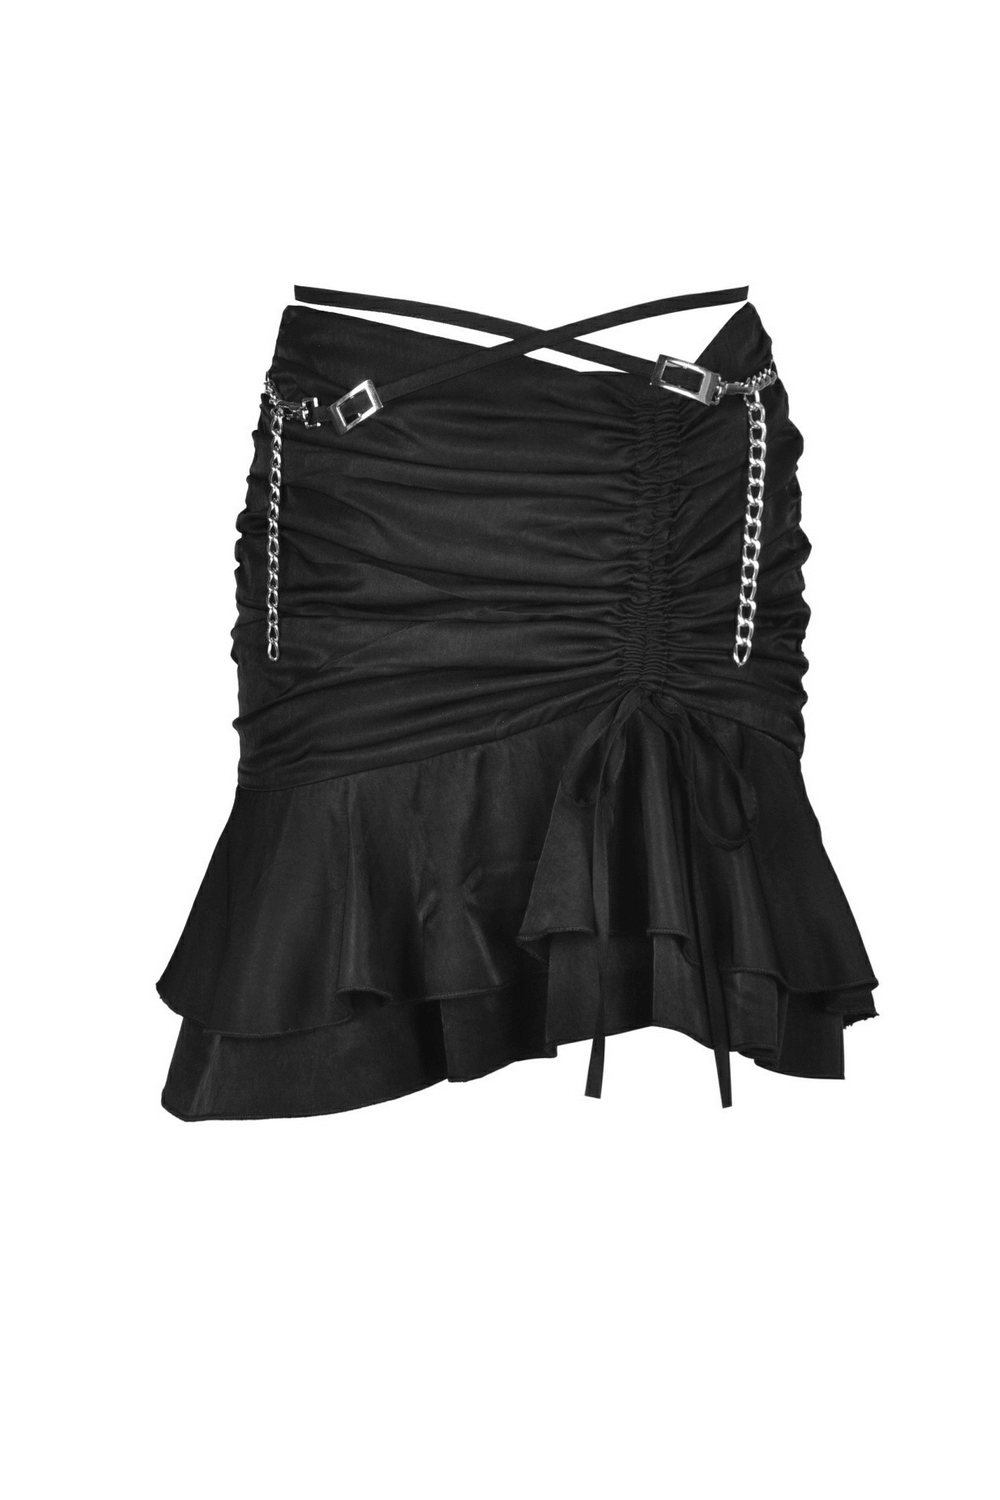 Sexy Grunge Women's Asymmetrical Skirt with Chains and Ruffles